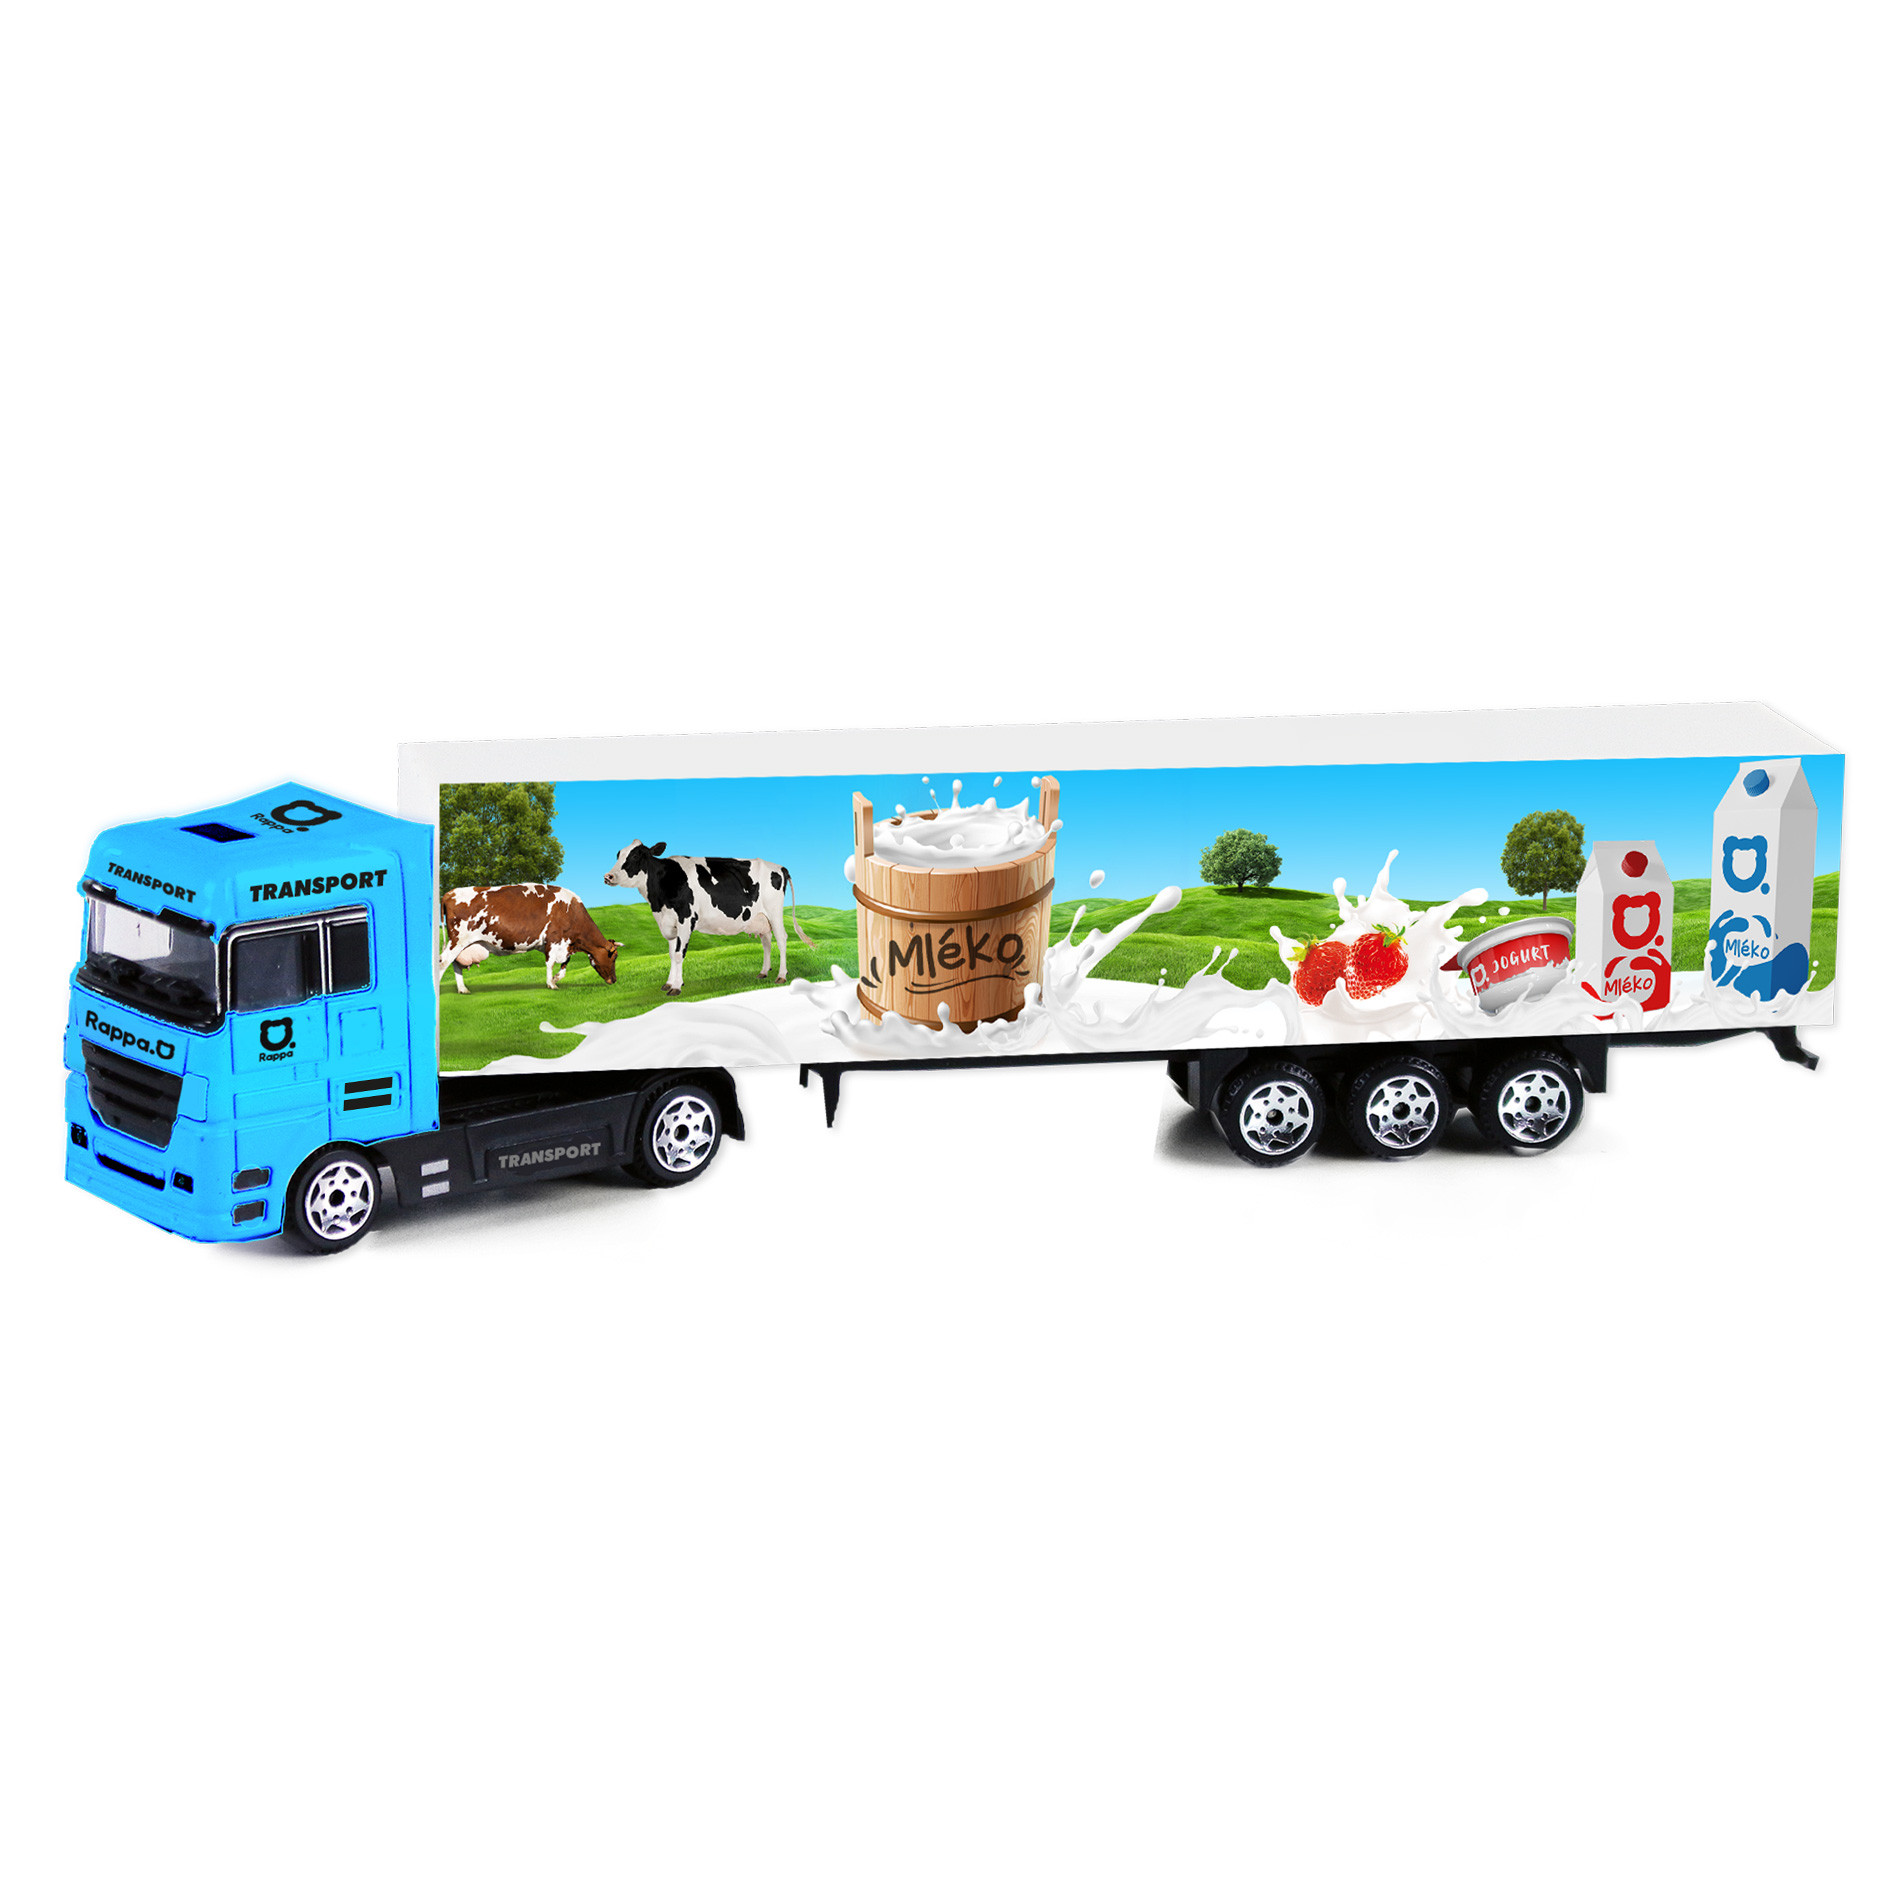 Car truck milk and milk products